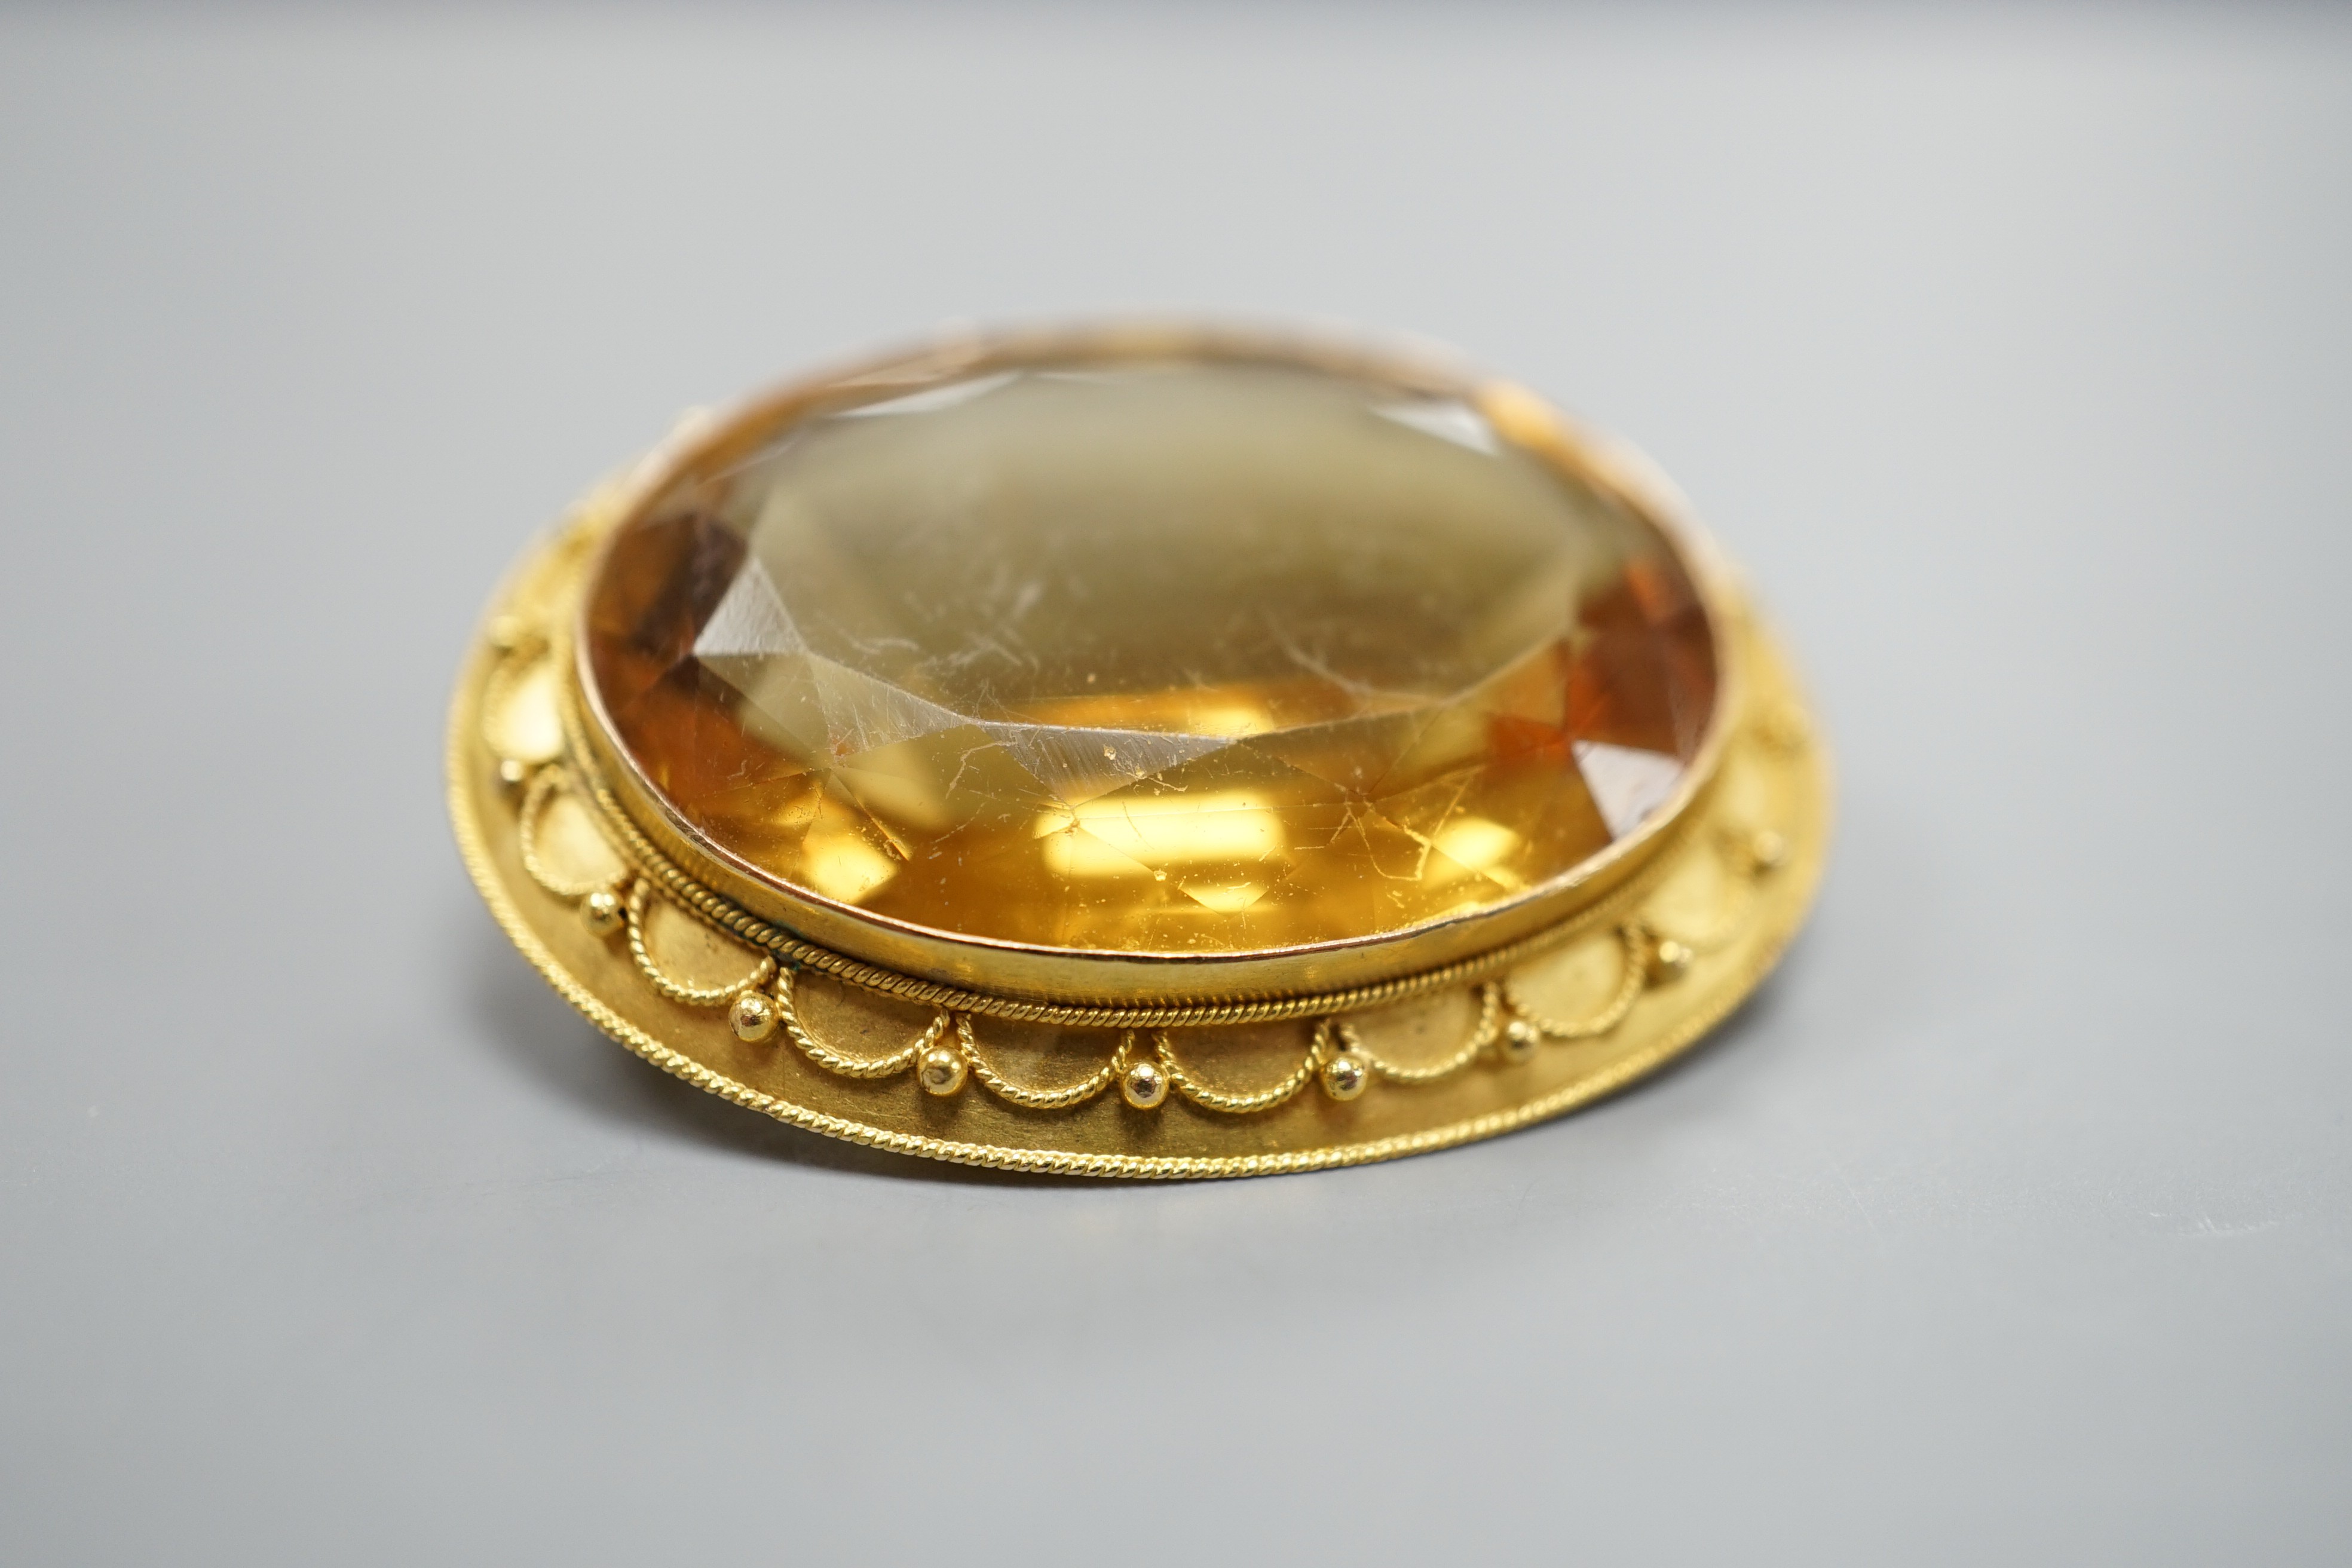 A Victorian yellow metal and citrine set oval brooch, with cannetille work border, 35mm, gross weight 11.3 grams.